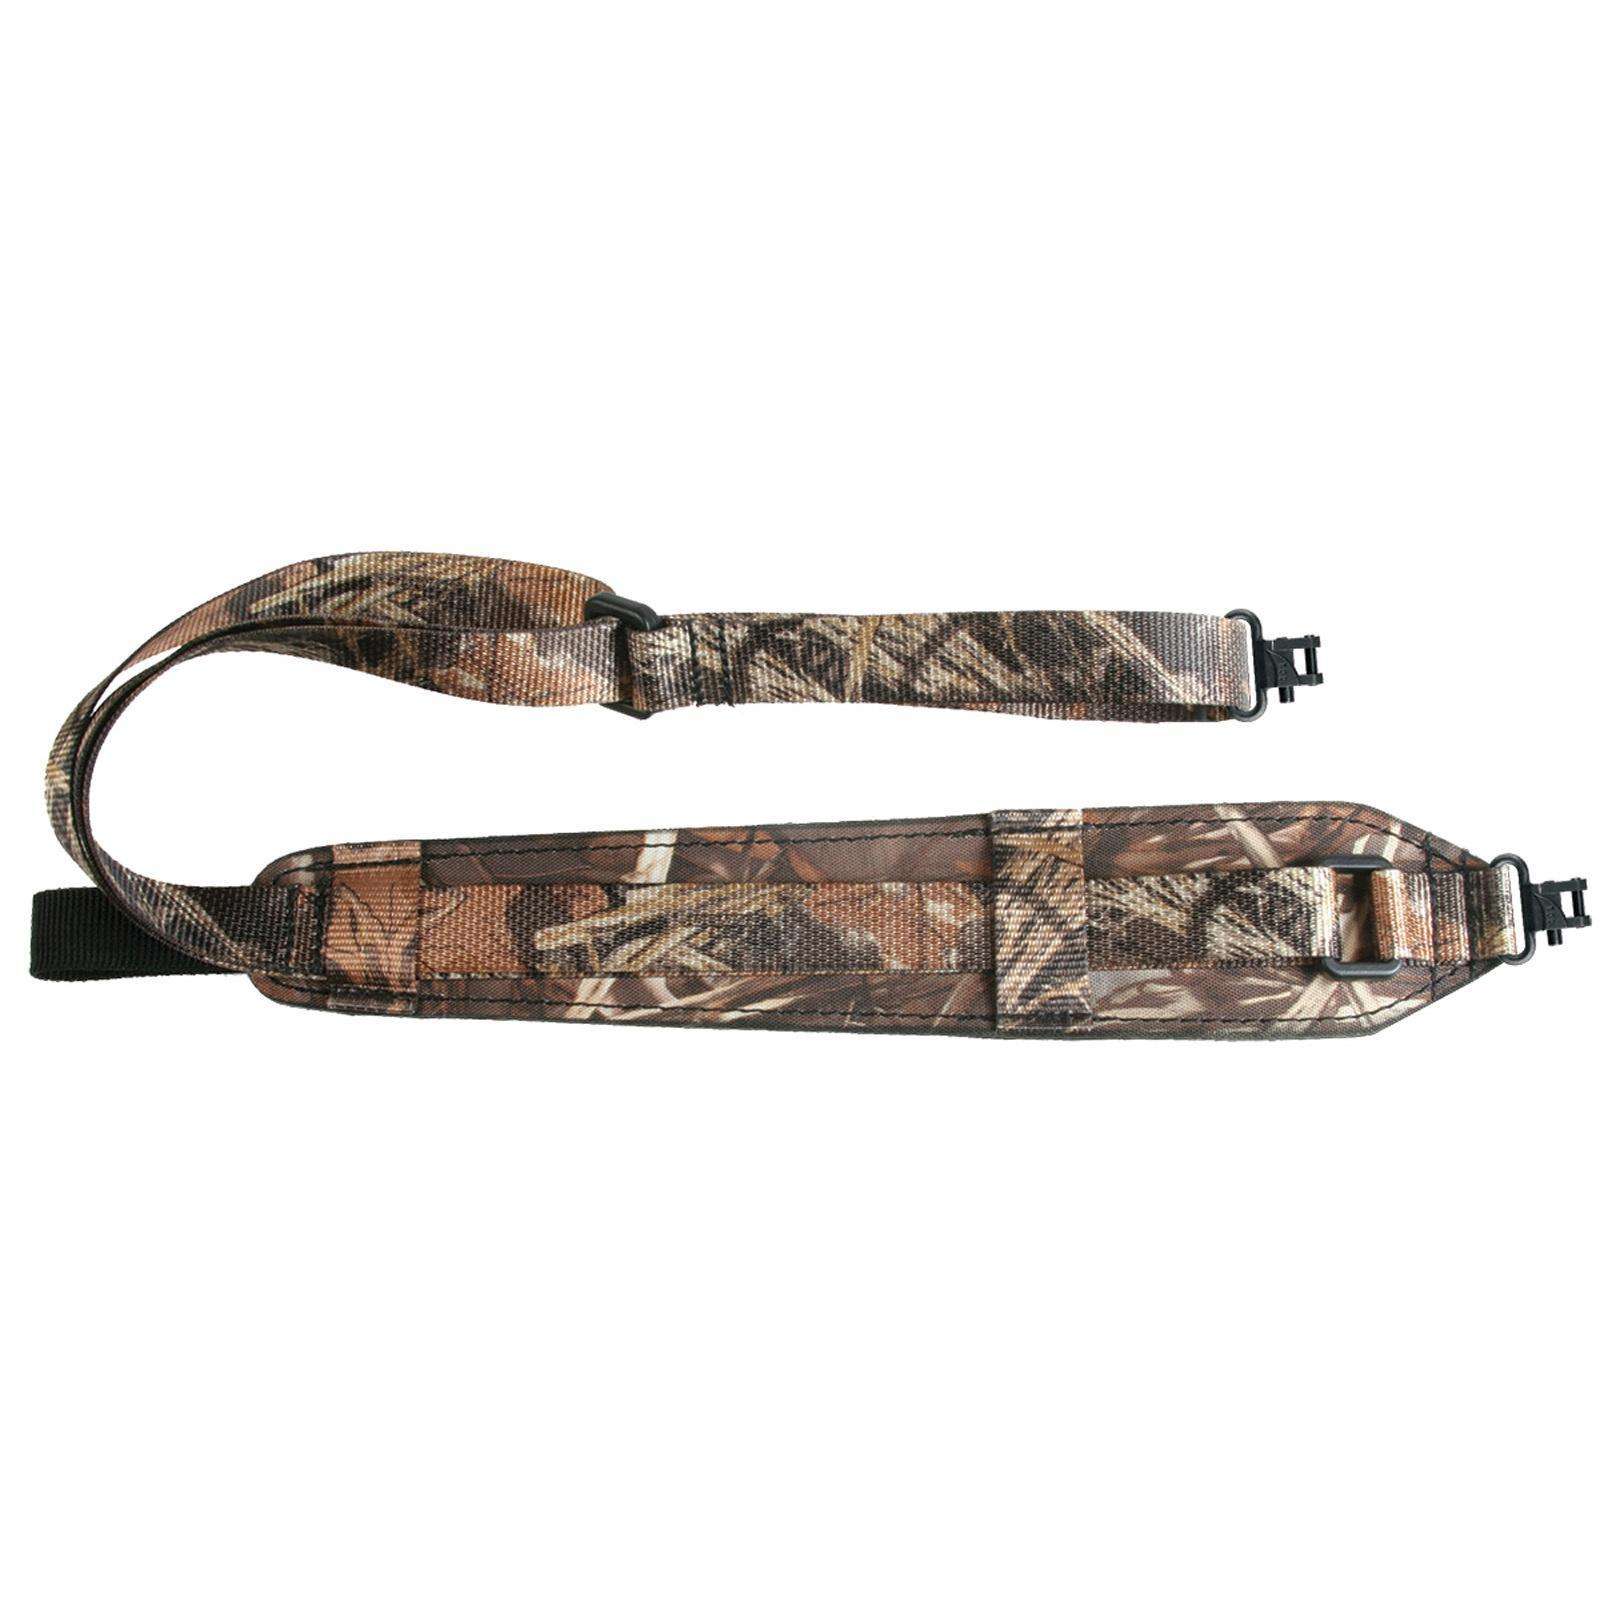 Outdoor Connection AD20923 Original Padded Super Sling with 1